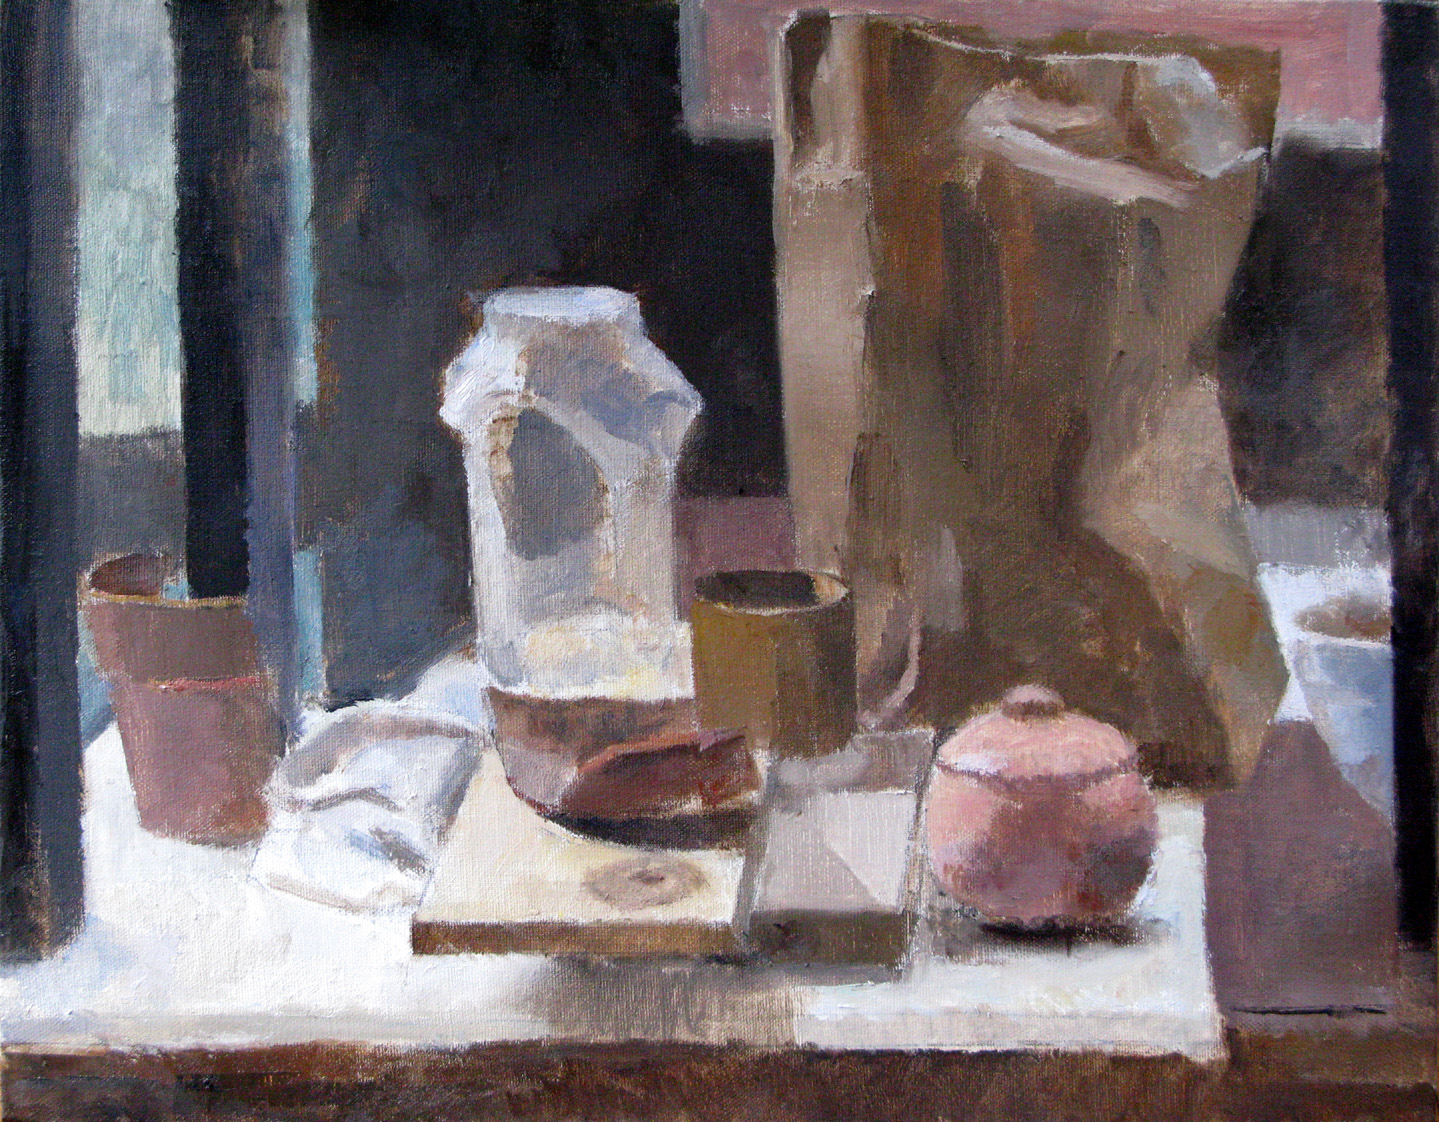 Plant Pot Fragments and Paper Bag, 16" x 20", oil on linen, 2013.